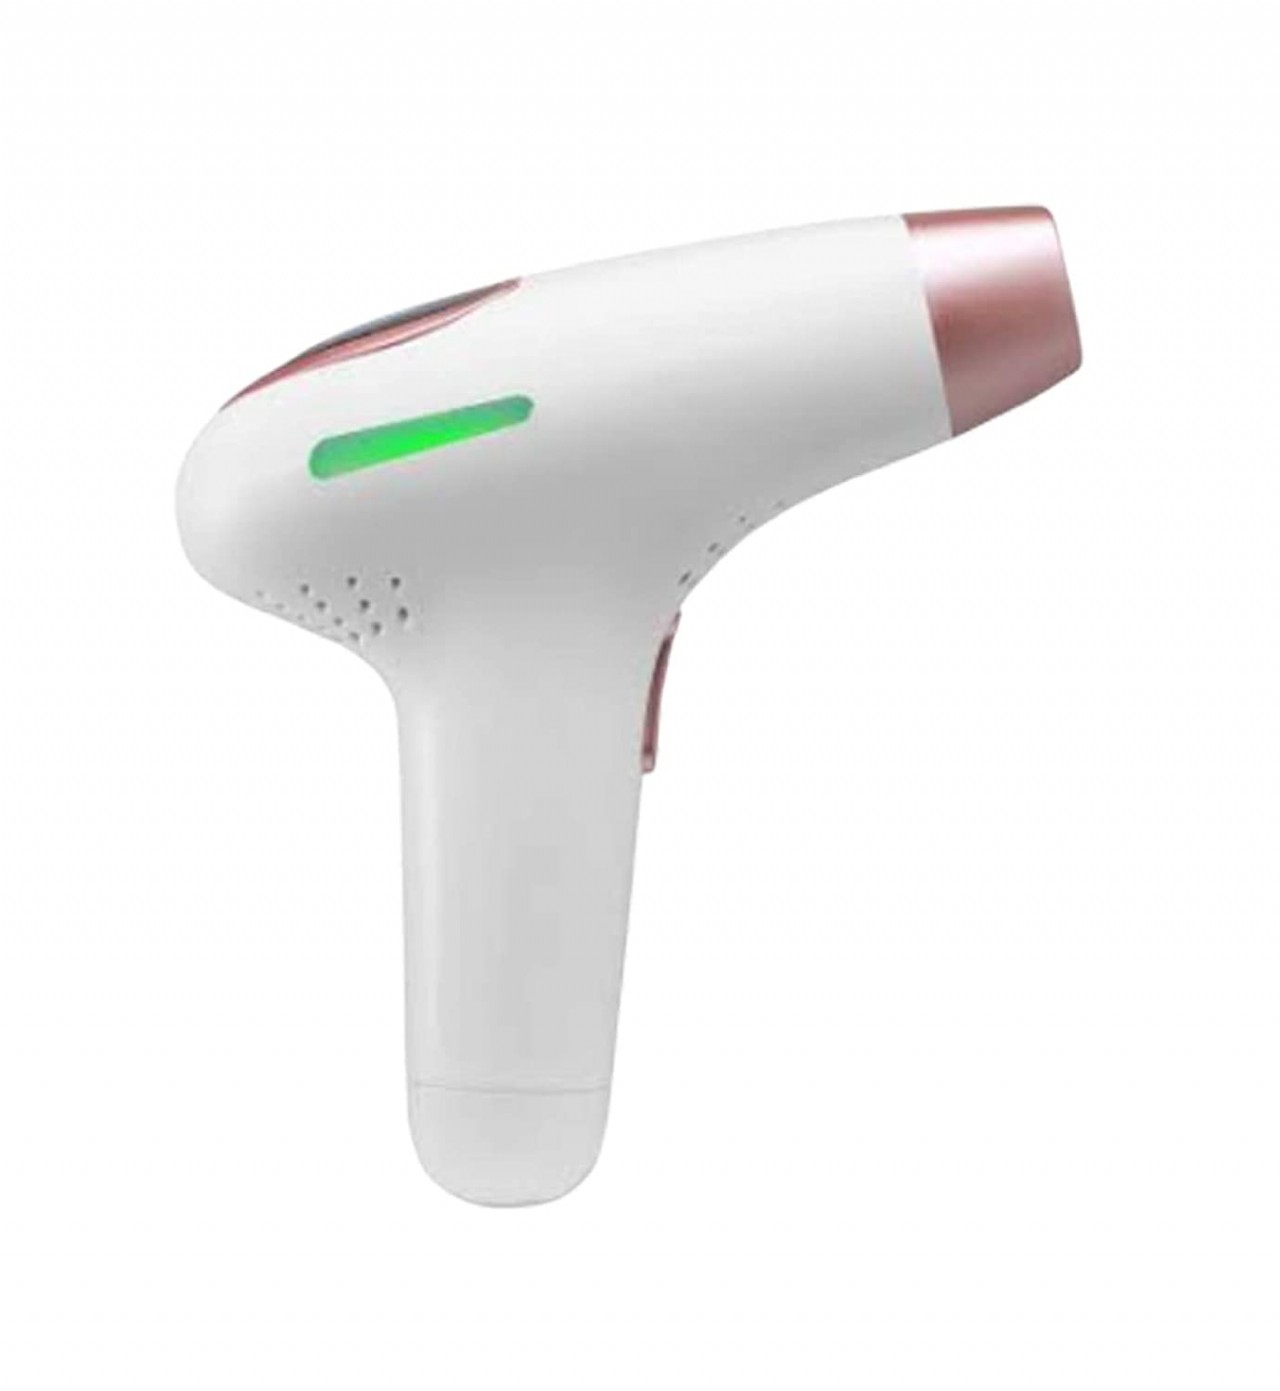 YOFOMAY Advanced IPL Permanent Hair Removal System at Home, Face and Body Hair Removal Device